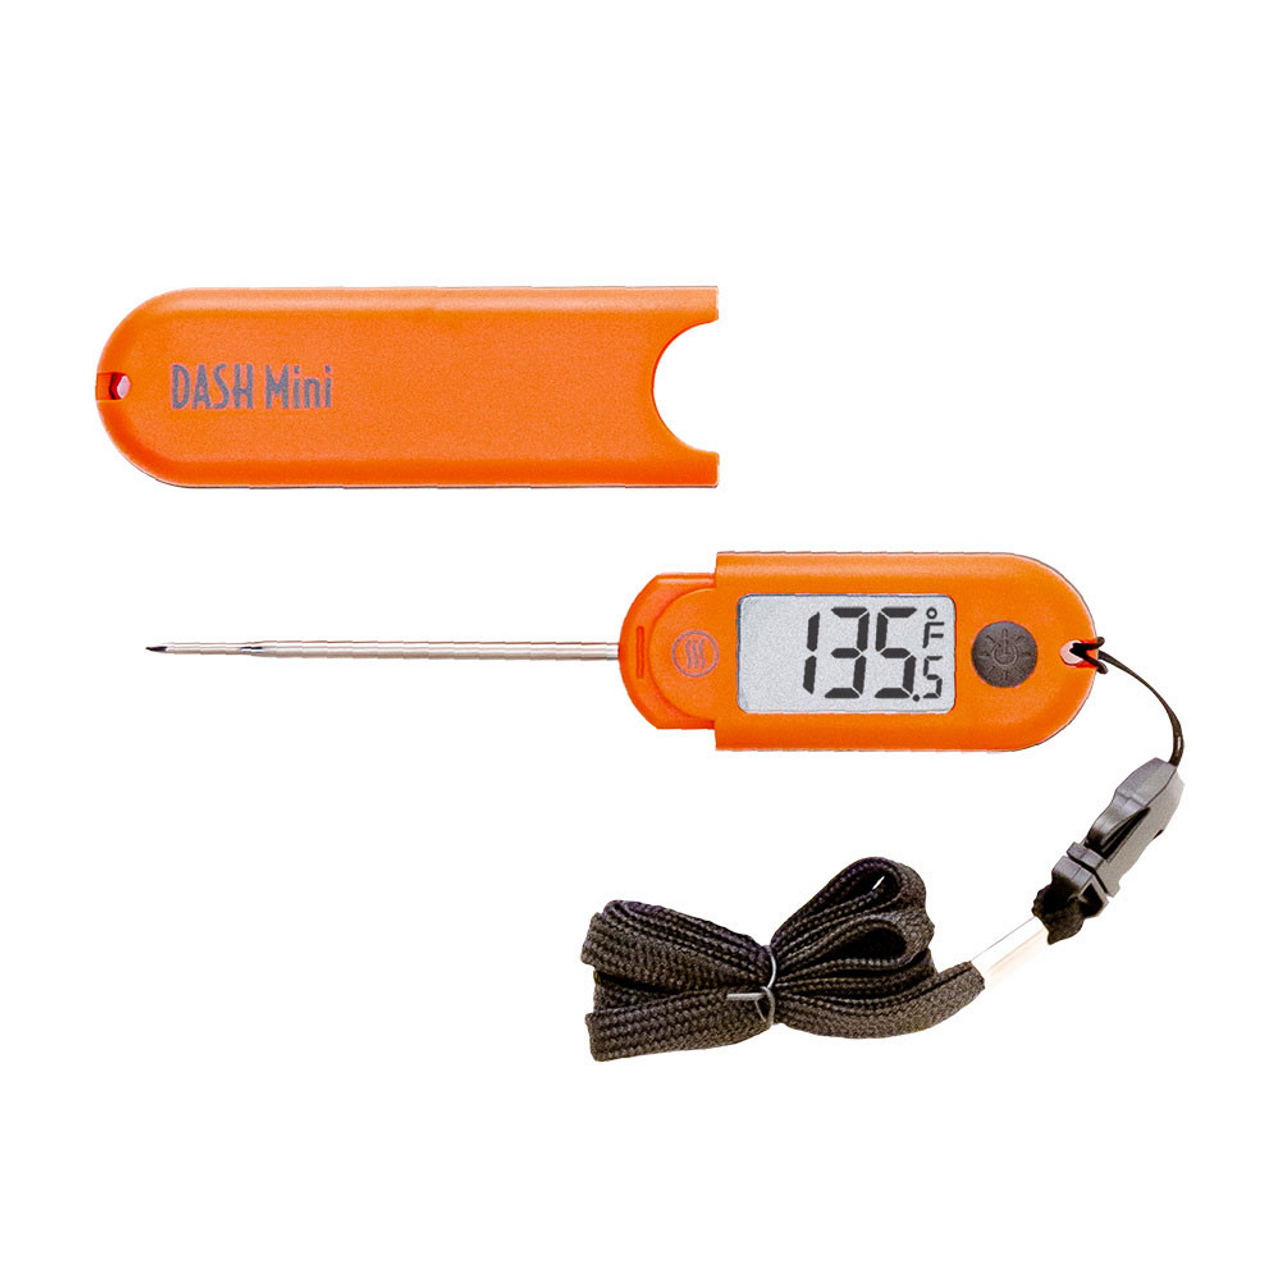 Extra-Extra Long-Probe Waterproof Traceable Thermometer